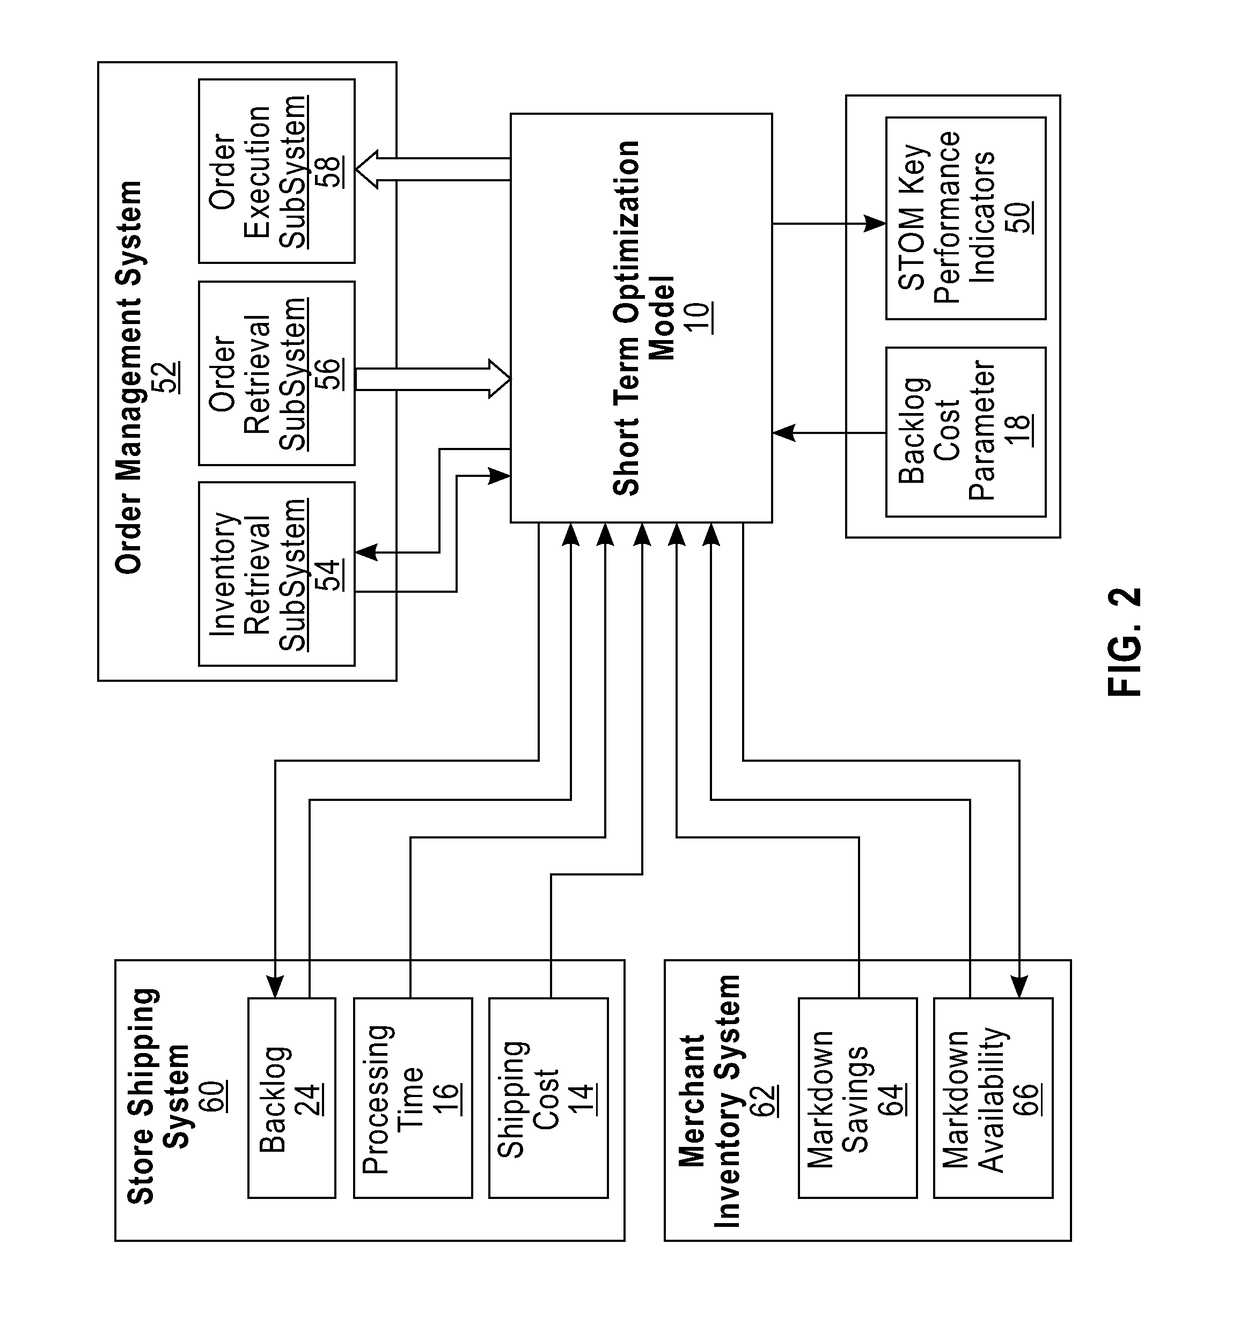 System and method for optimizing delivering sources of online orders